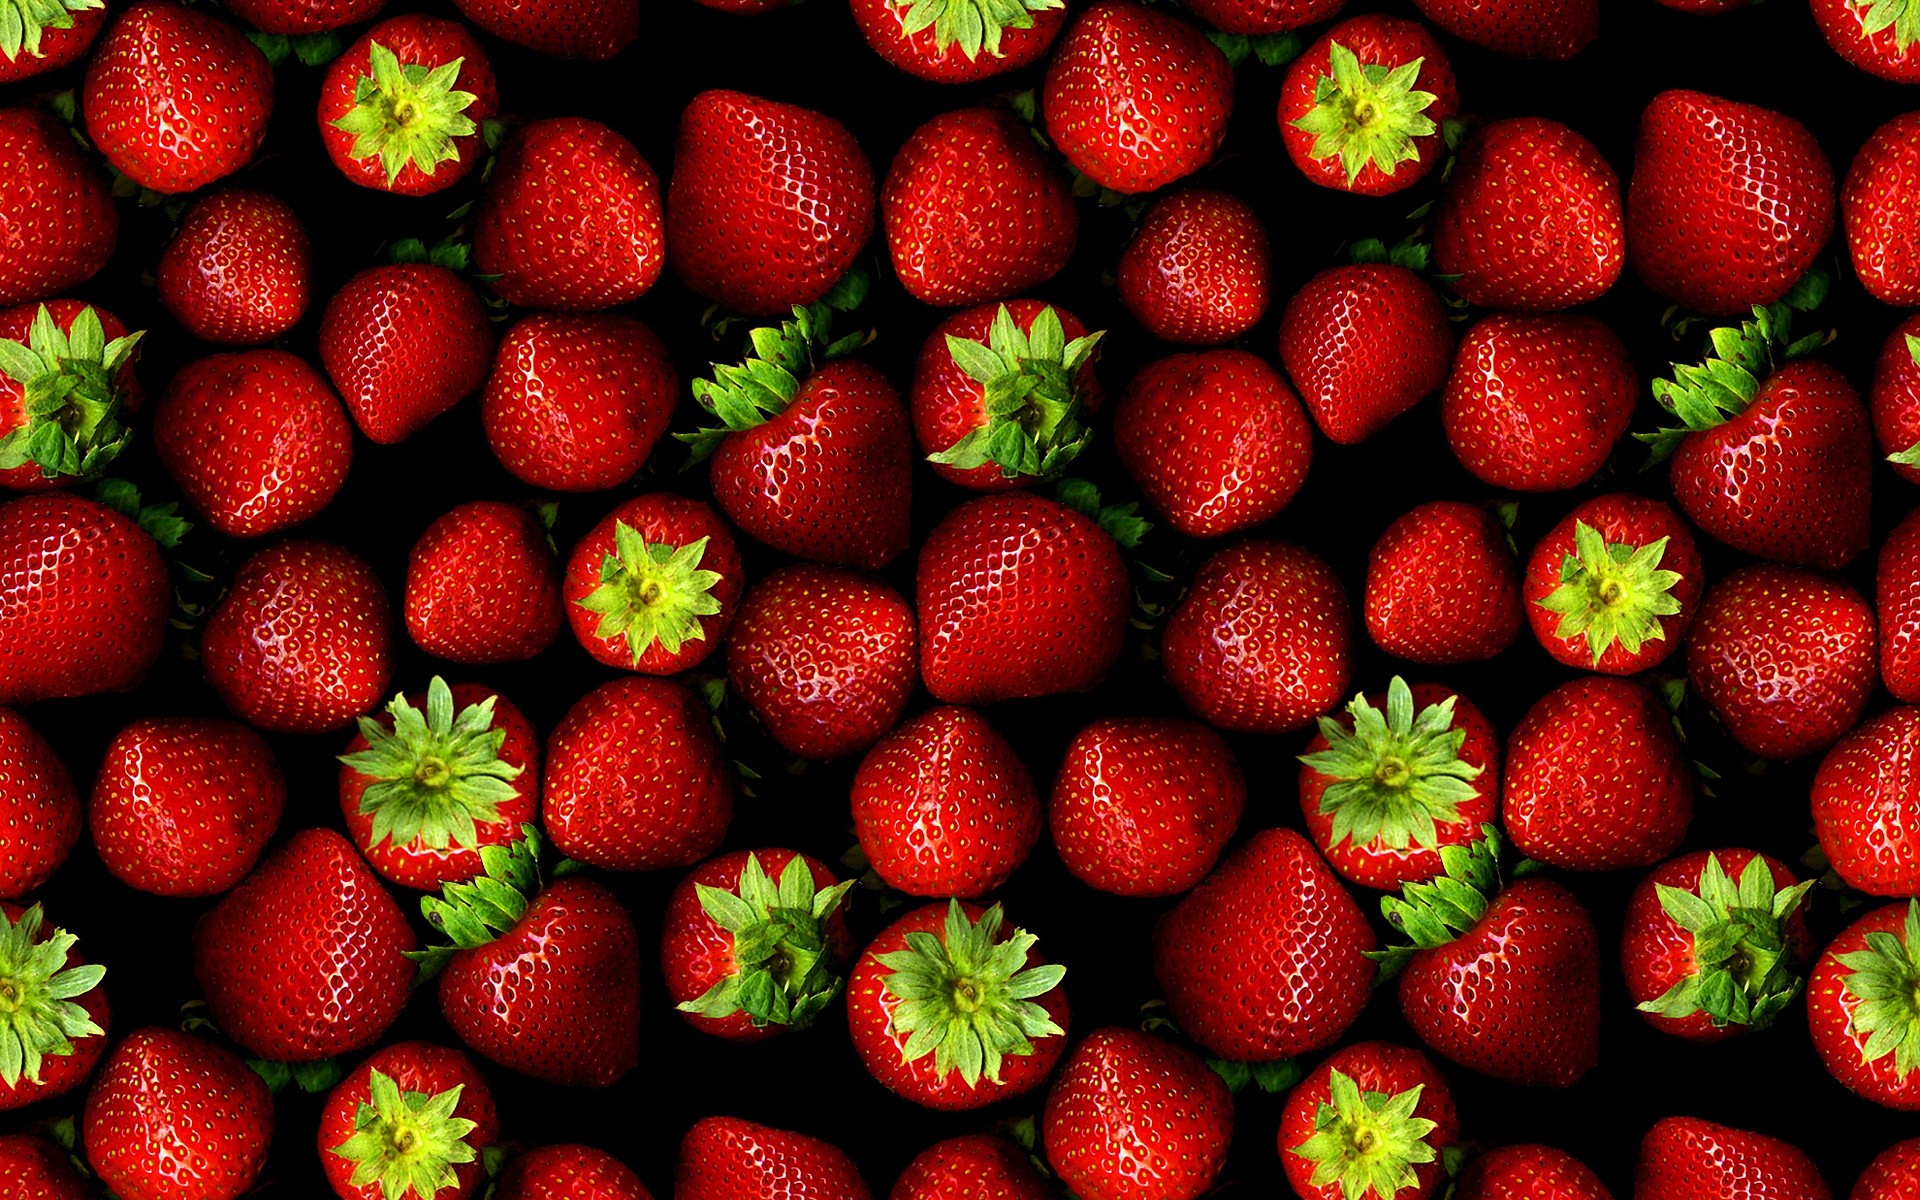 10 Amazing Benefits of Strawberries that You Probably Never Knew